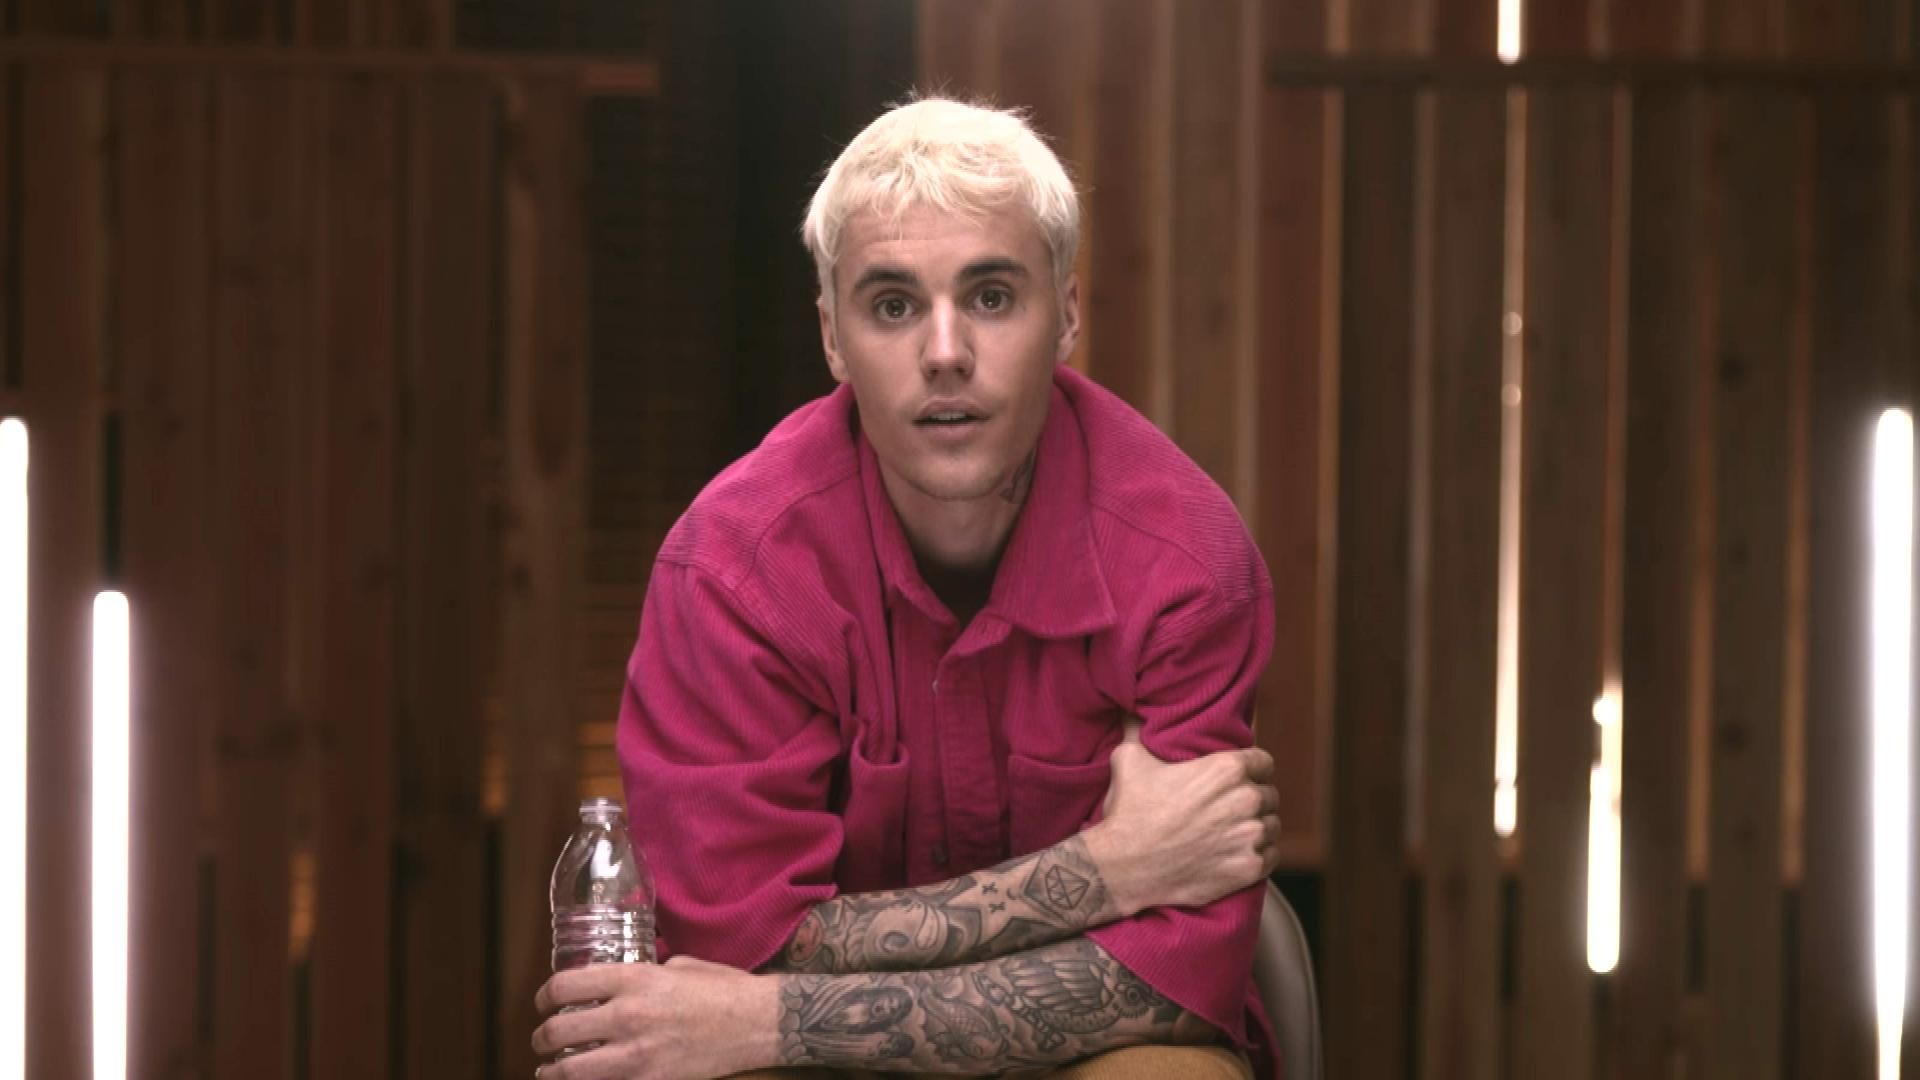 Justin Bieber Opens Up About Crying Paparazzi Photo and Managing His Mental Health